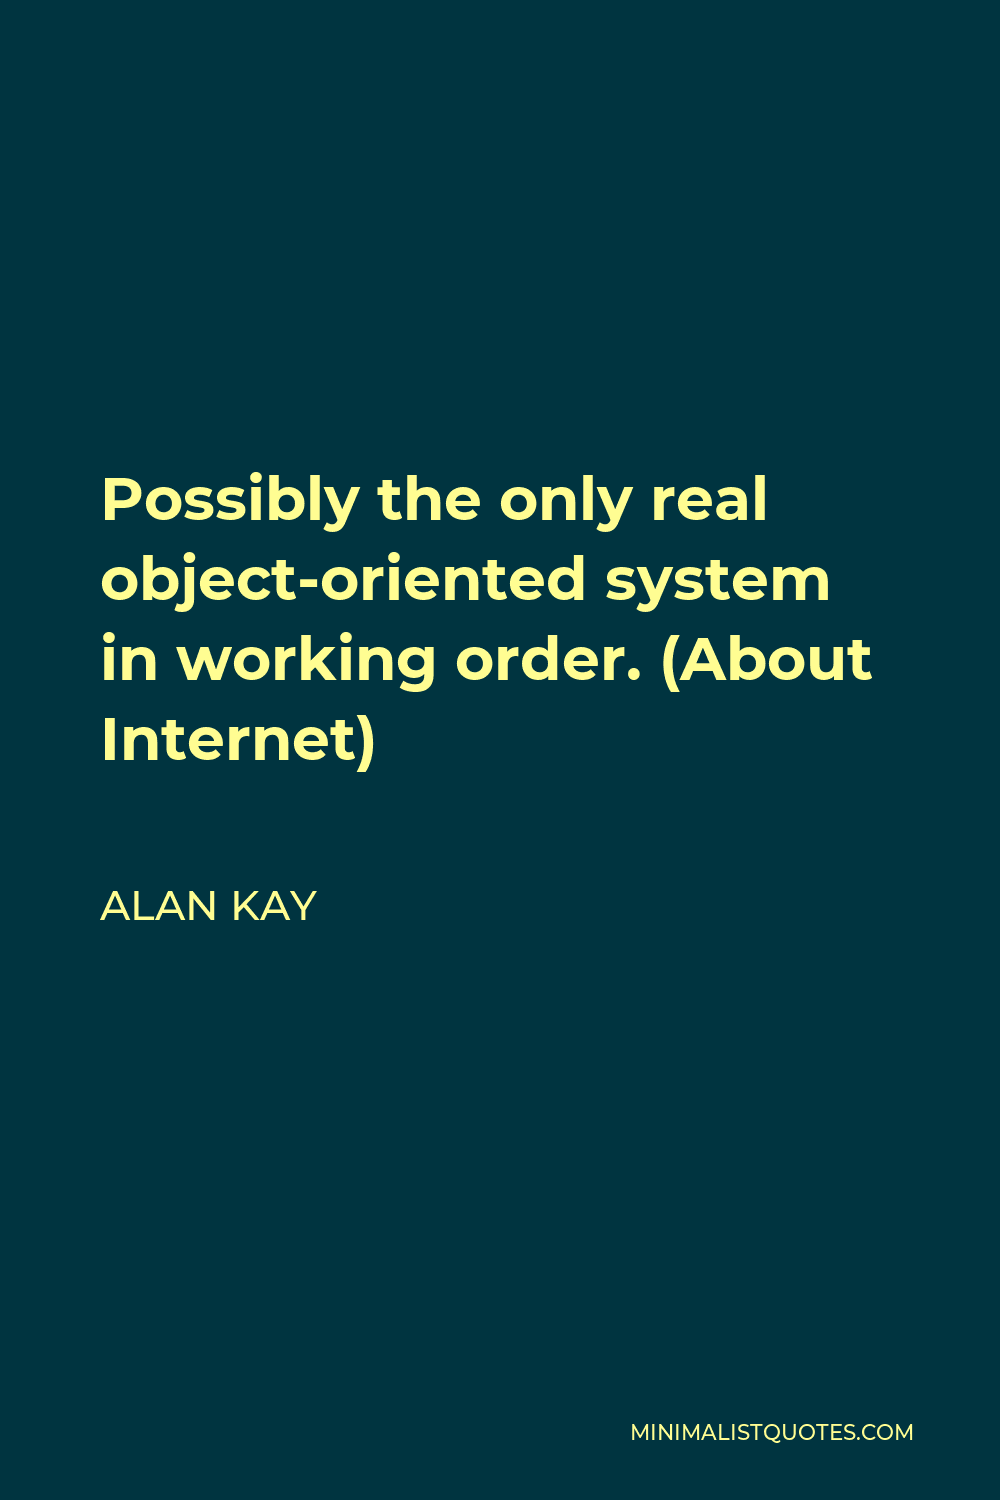 Alan Kay Quote - Possibly the only real object-oriented system in working order. (About Internet)